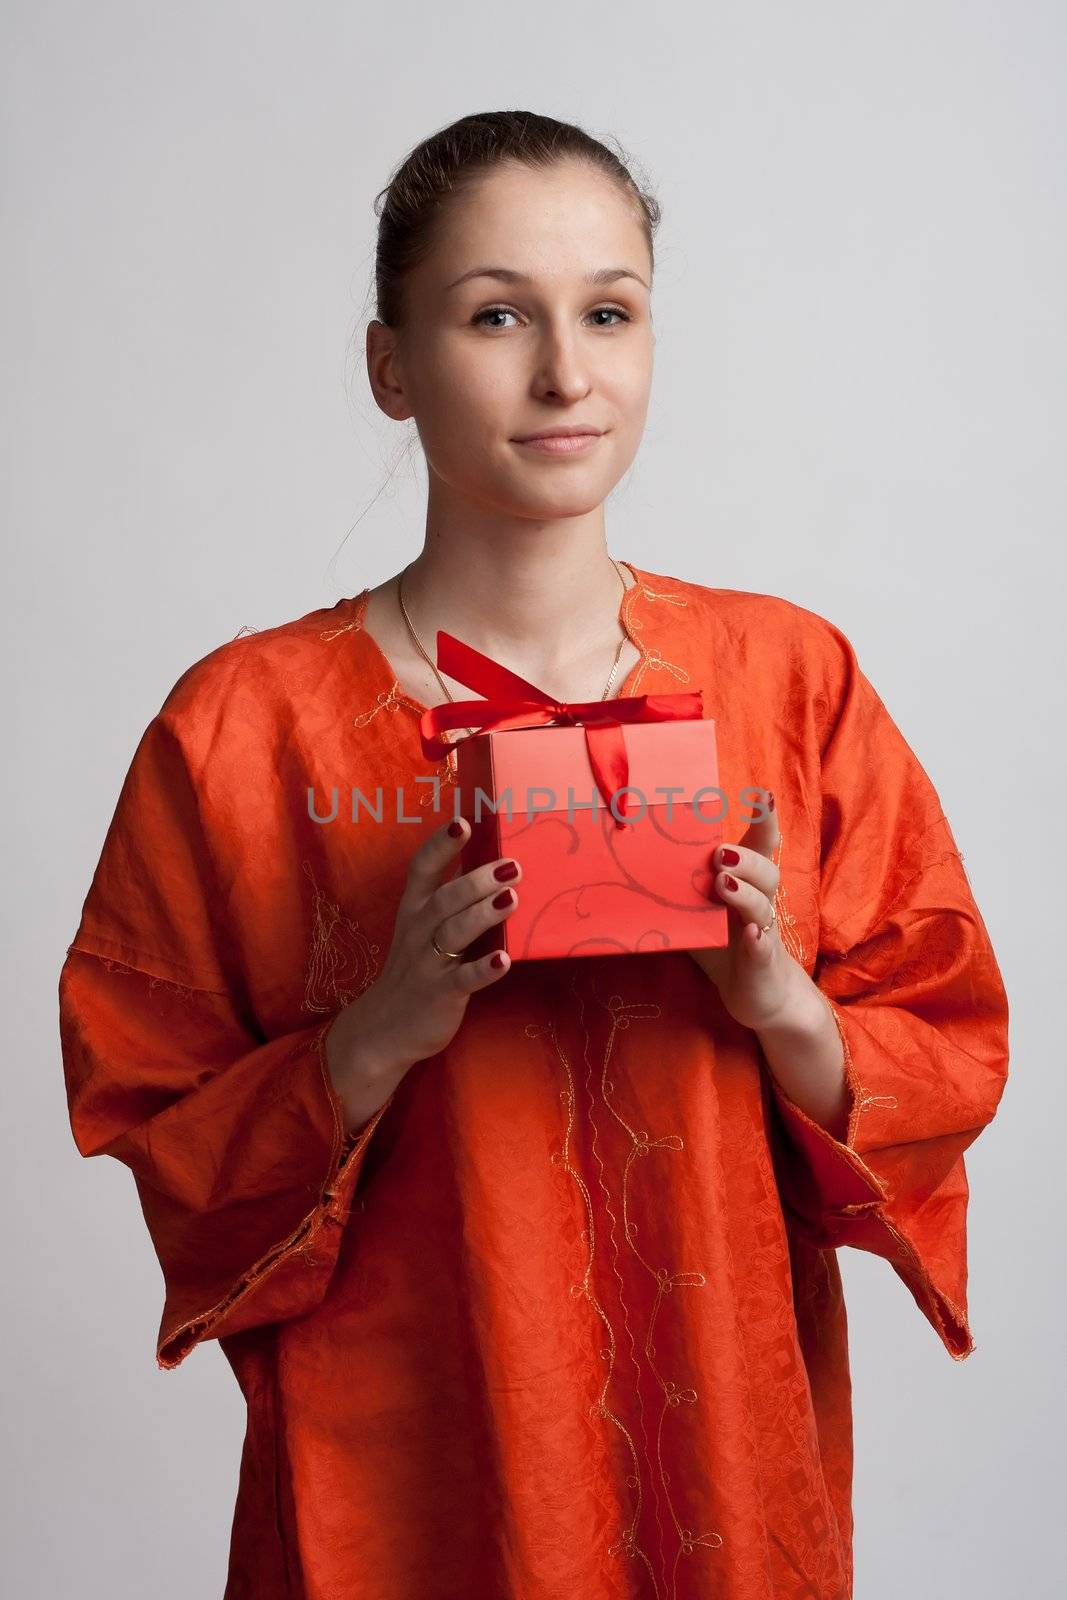 Girl in orange dress on a light background with a gift in the hands of